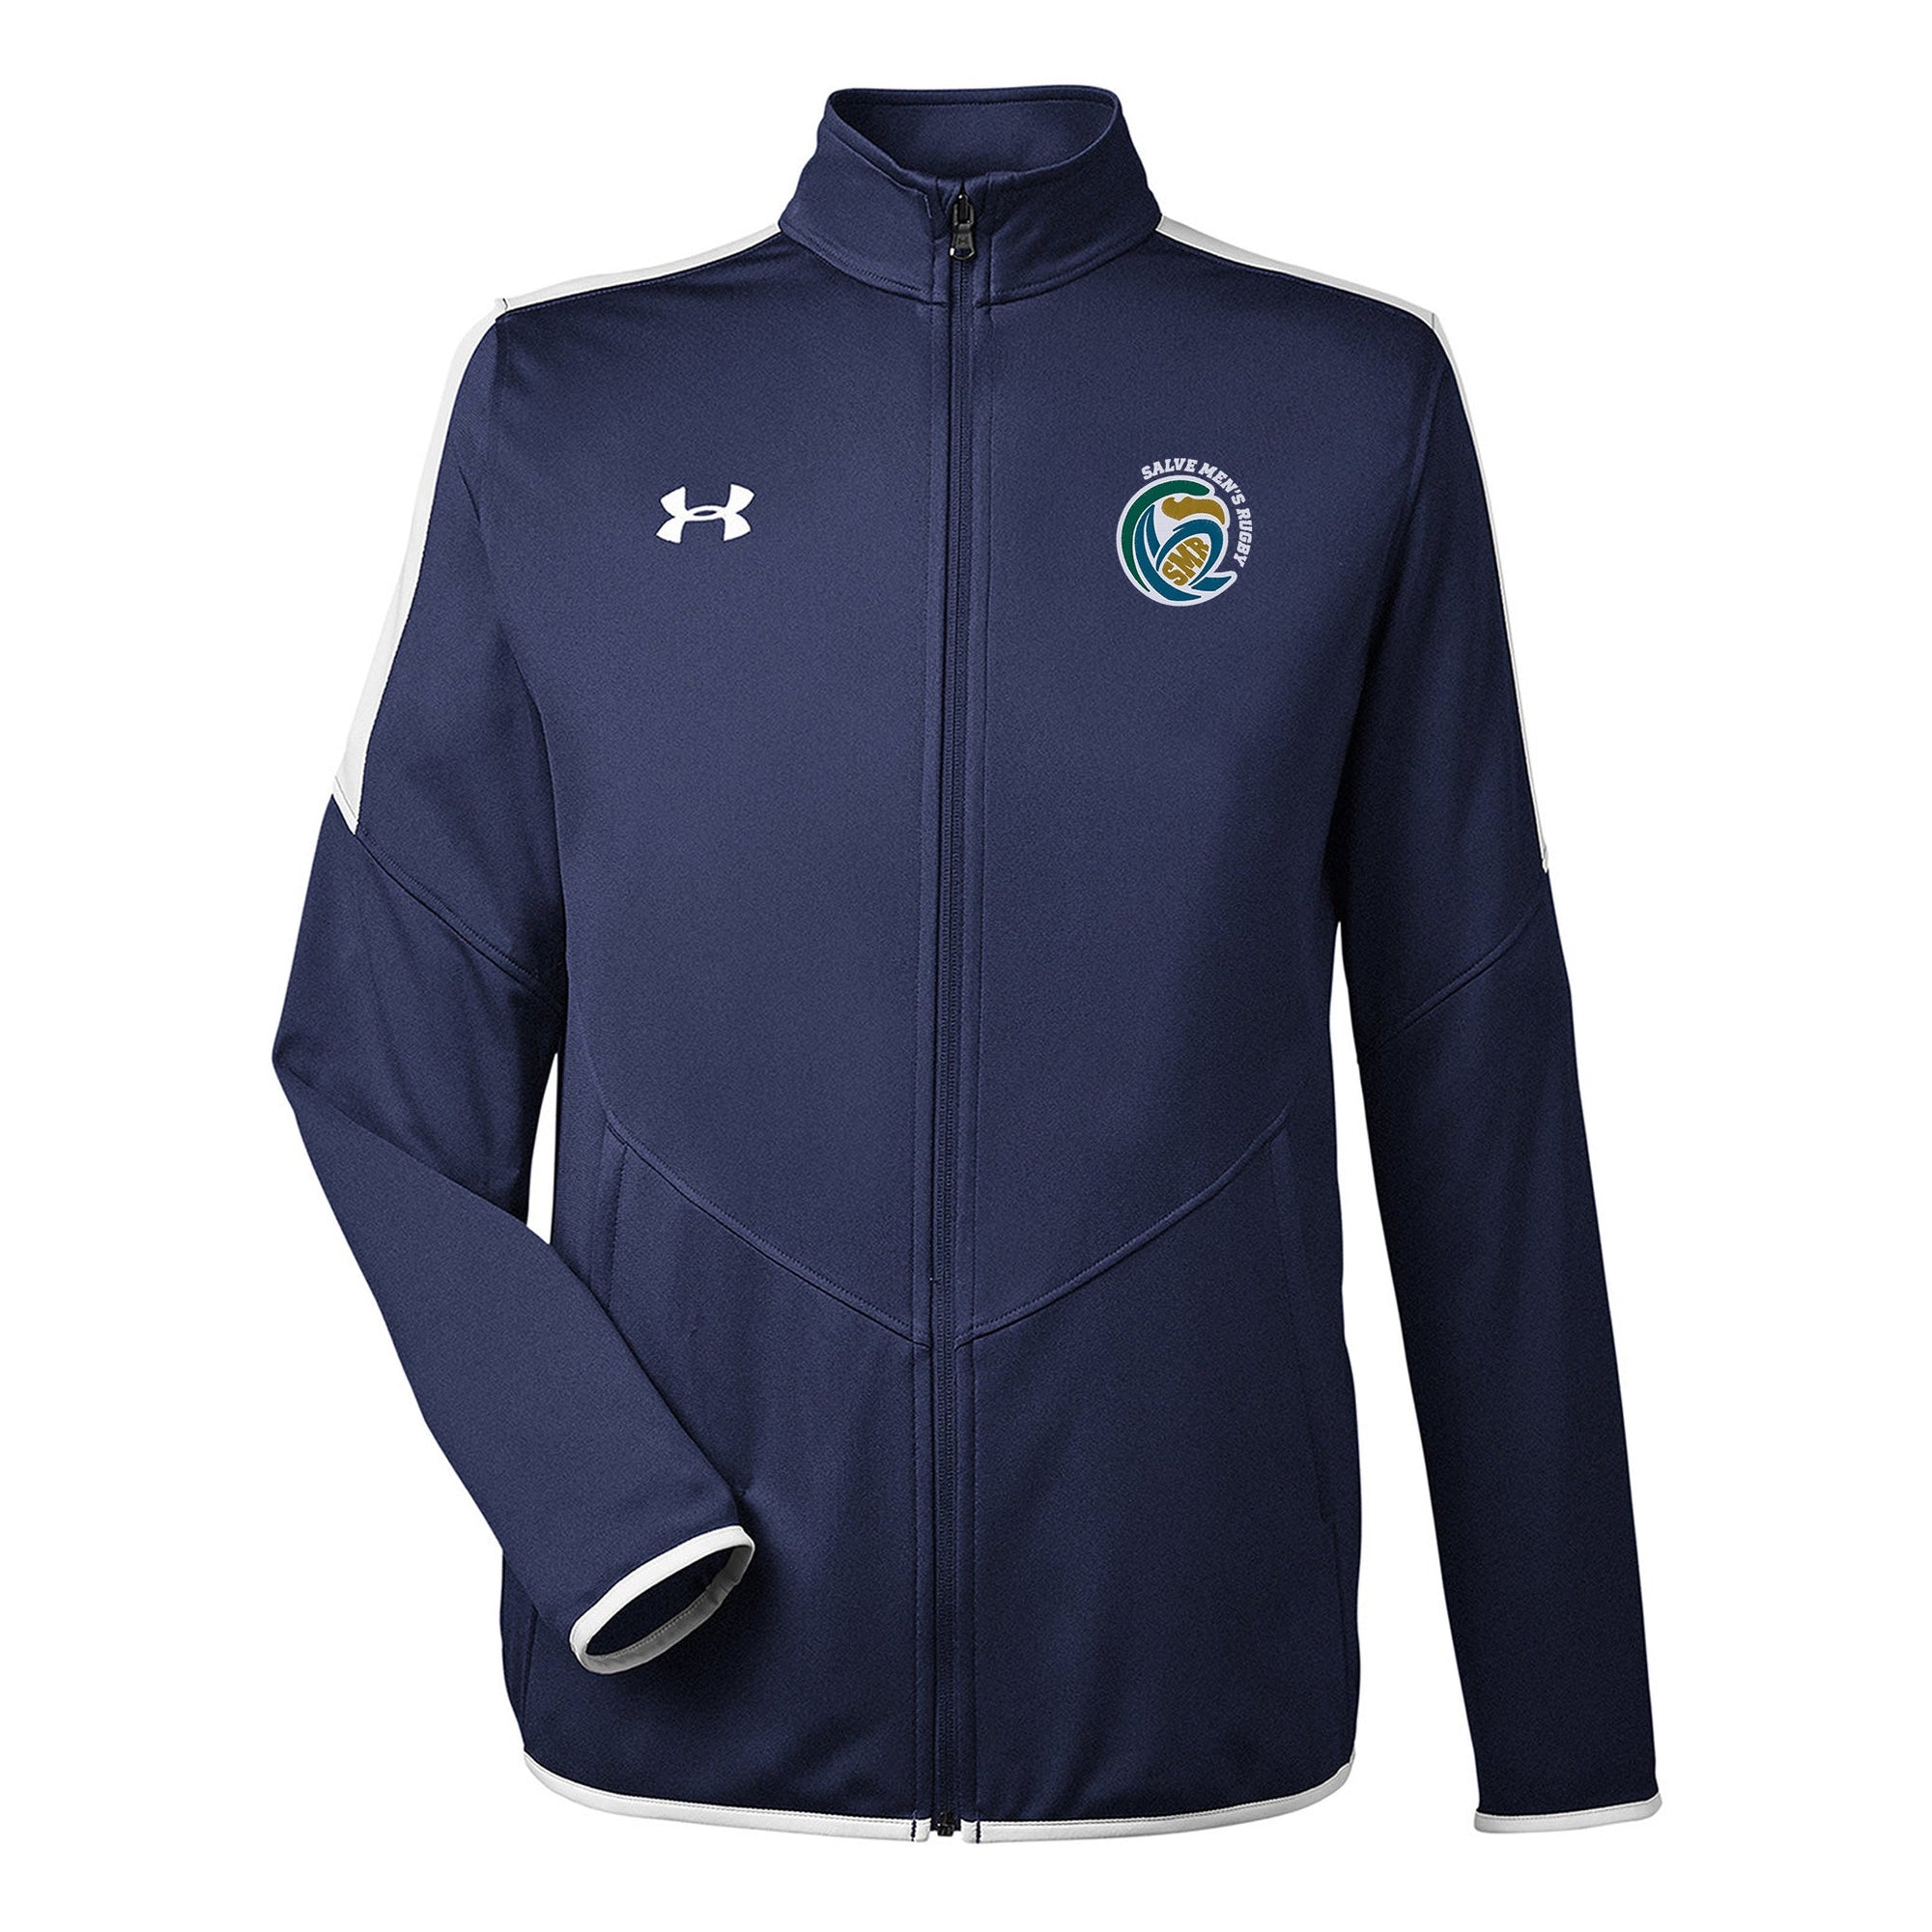 Rugby Imports Salve Men's Rugby UA Rival Knit Jacket